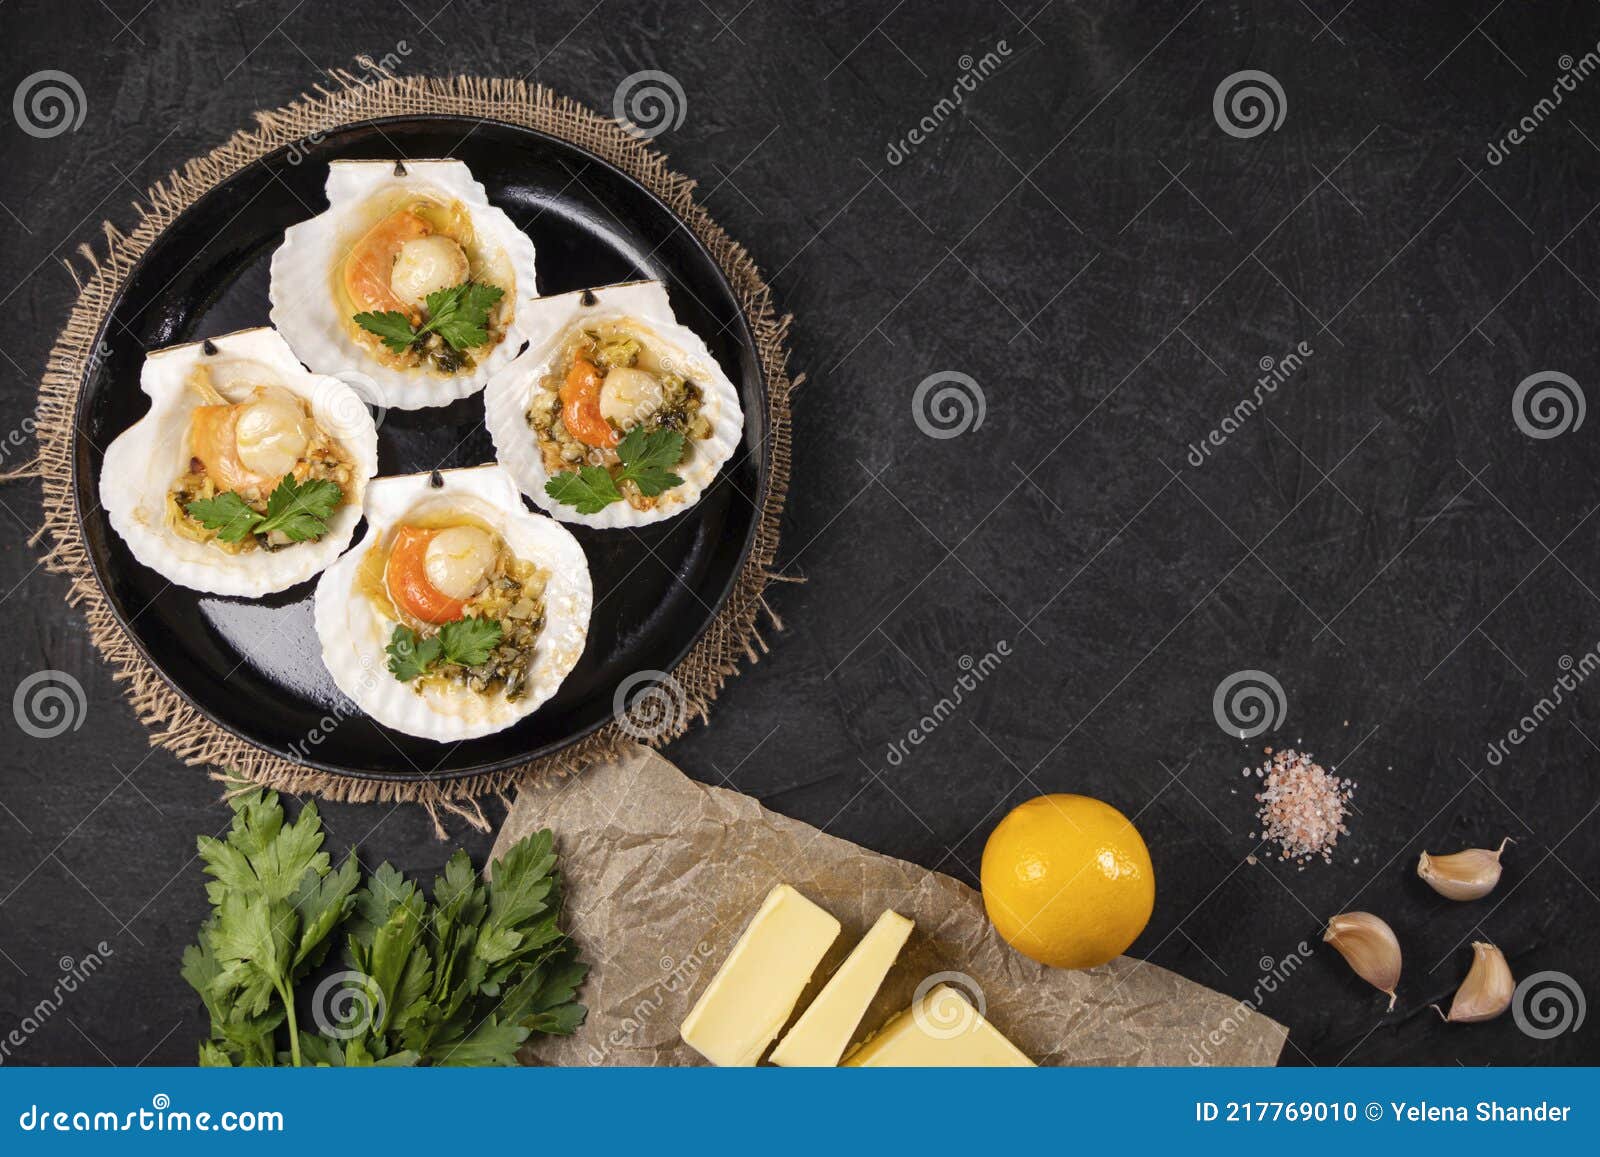 Recipe for Cooking Scallops with Caviar. Baked Scallops with Caviar and ...